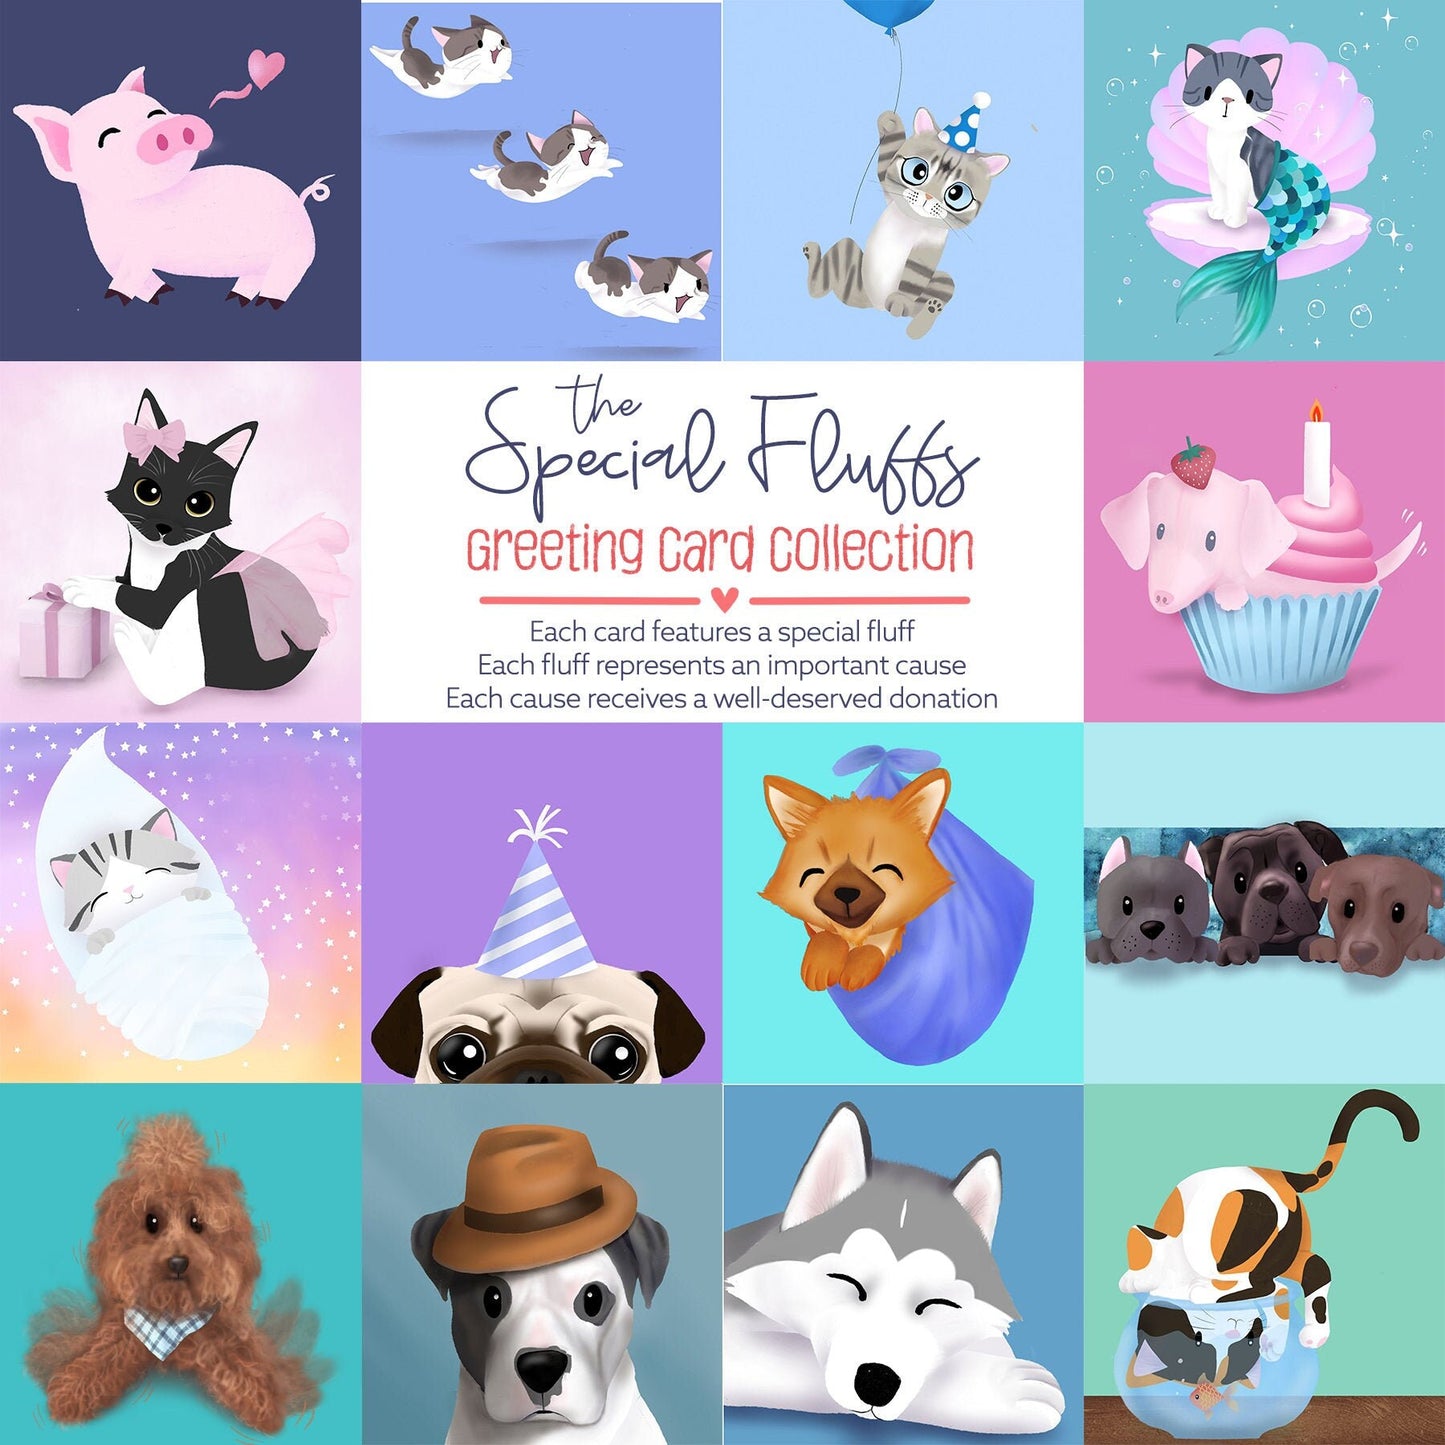 Baals the Pit Bull - Any Occasion Greeting Card, Greeting Cards/Postcards, Greeting & Note Cards